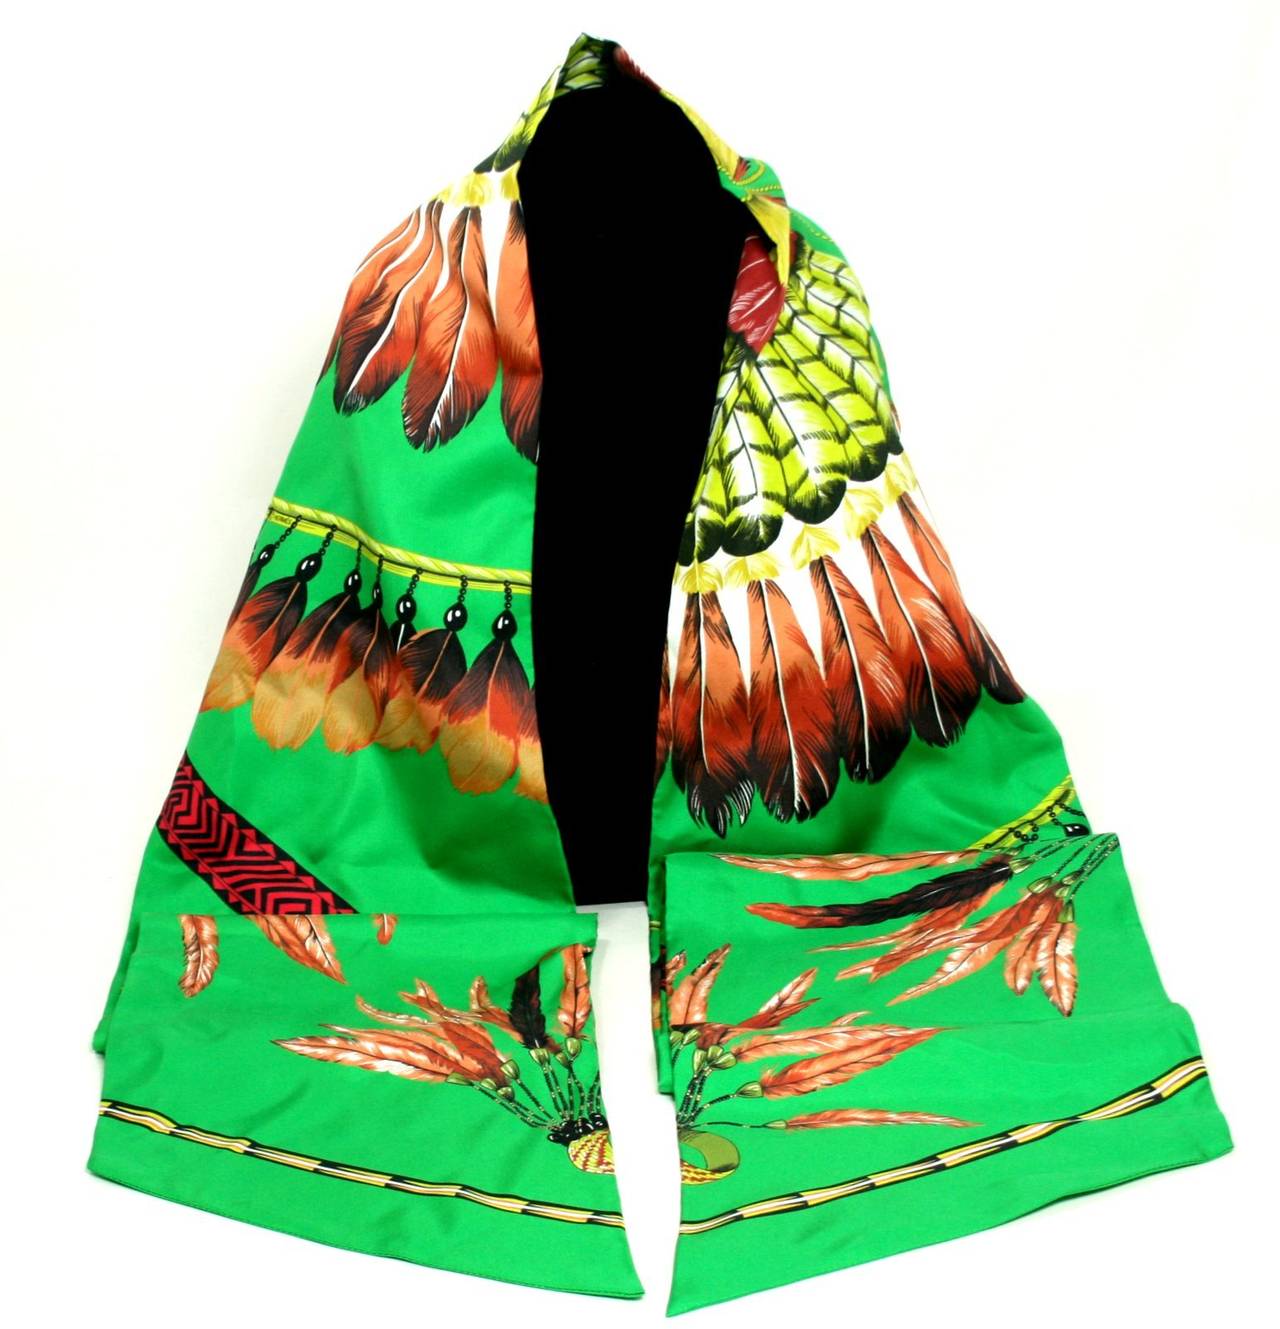 Never worn, this Hermès Vert Brazil Maxi Twilly is both stunning and collectible.  The possibilities are endless for this flowing silk scarf in vivid shades of vert, brun and absinthe. 

 The Brazil design features a vibrant green background with